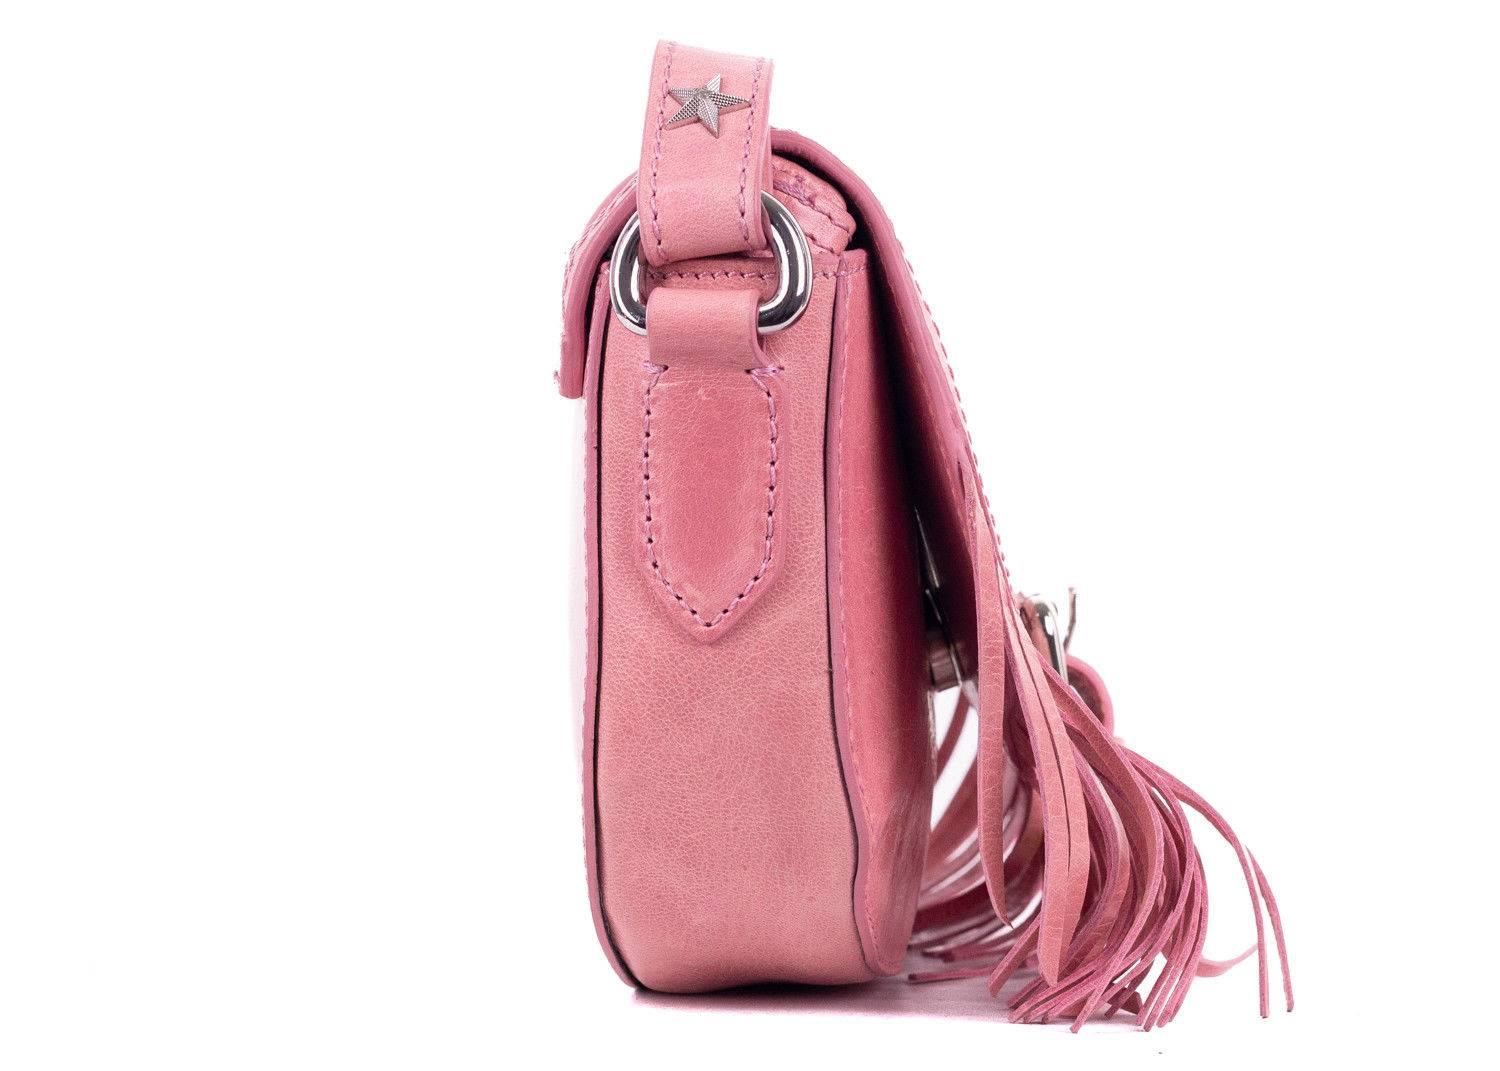 Roberto Cavalli pink leather shoulder bag. This shoulder bag features star hole detailing with fringes on the bottom and silver tone hardware. This bag is great for the incoming spring summer season. Pair it with all white shorts and a floral top